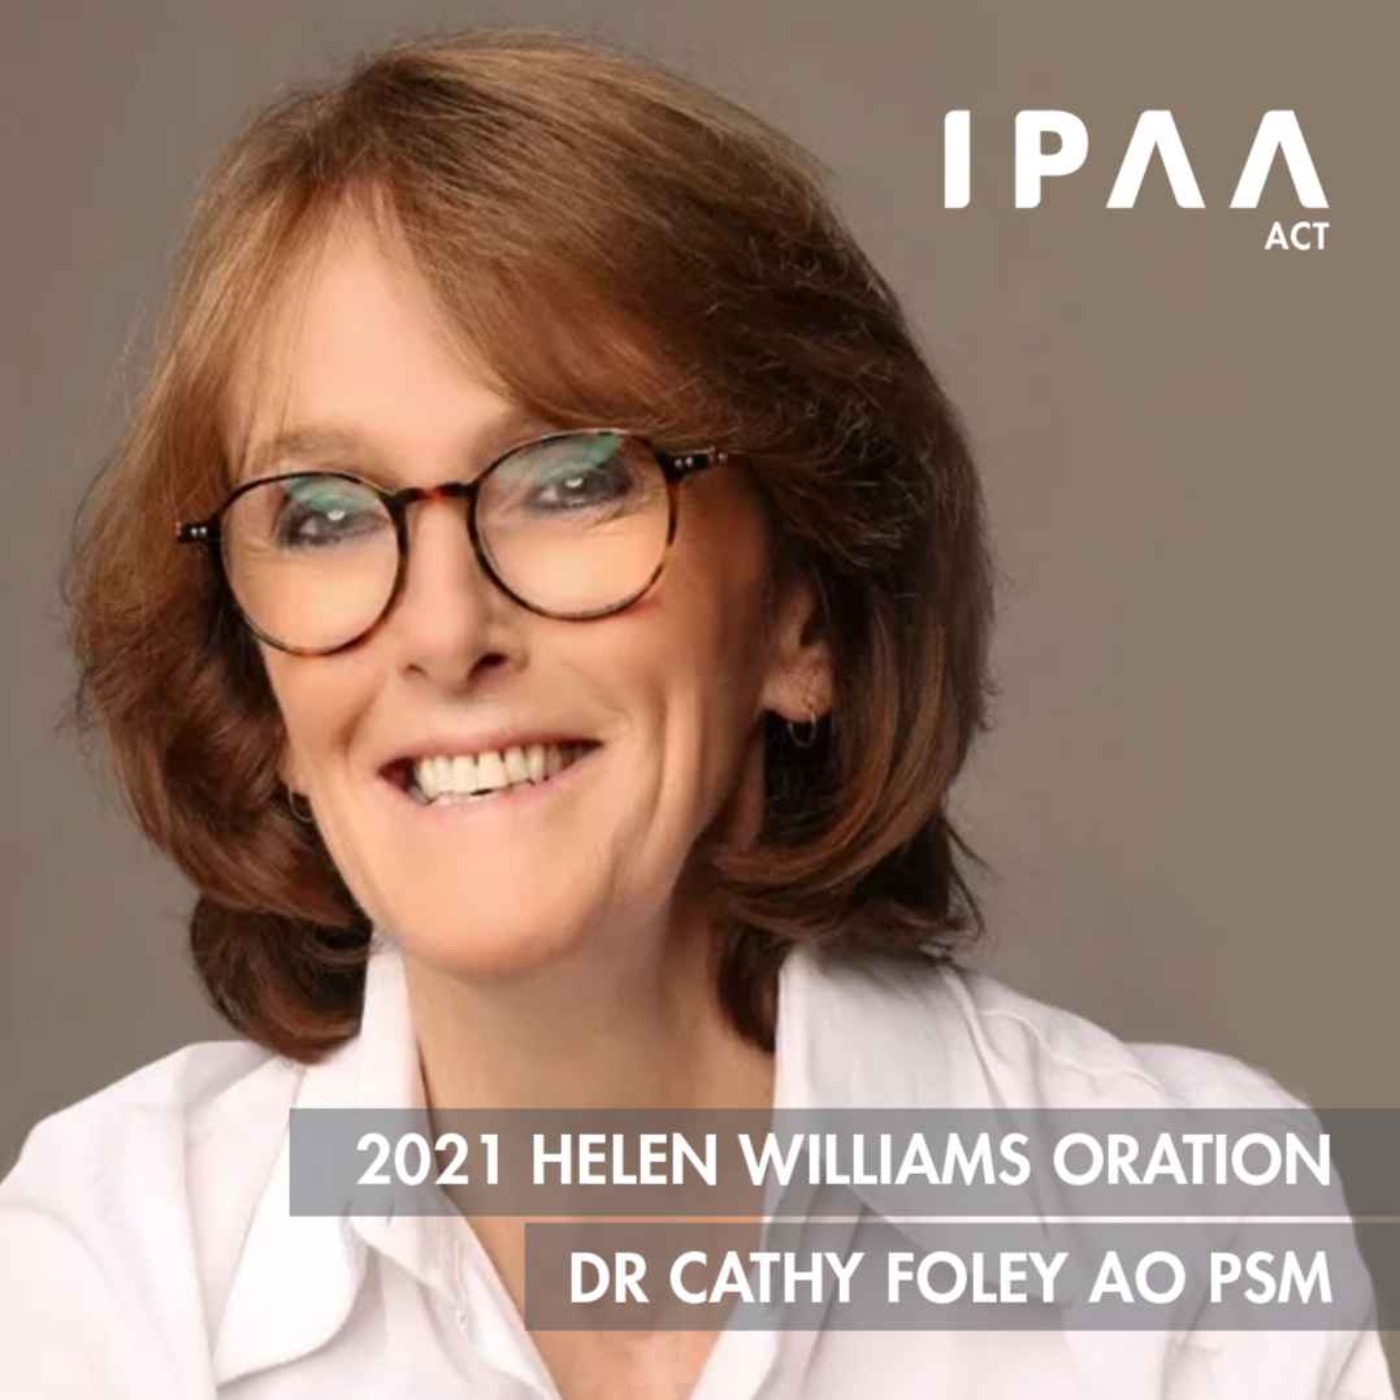 2021 Helen Williams Oration with Dr Cathy Foley AO PSM